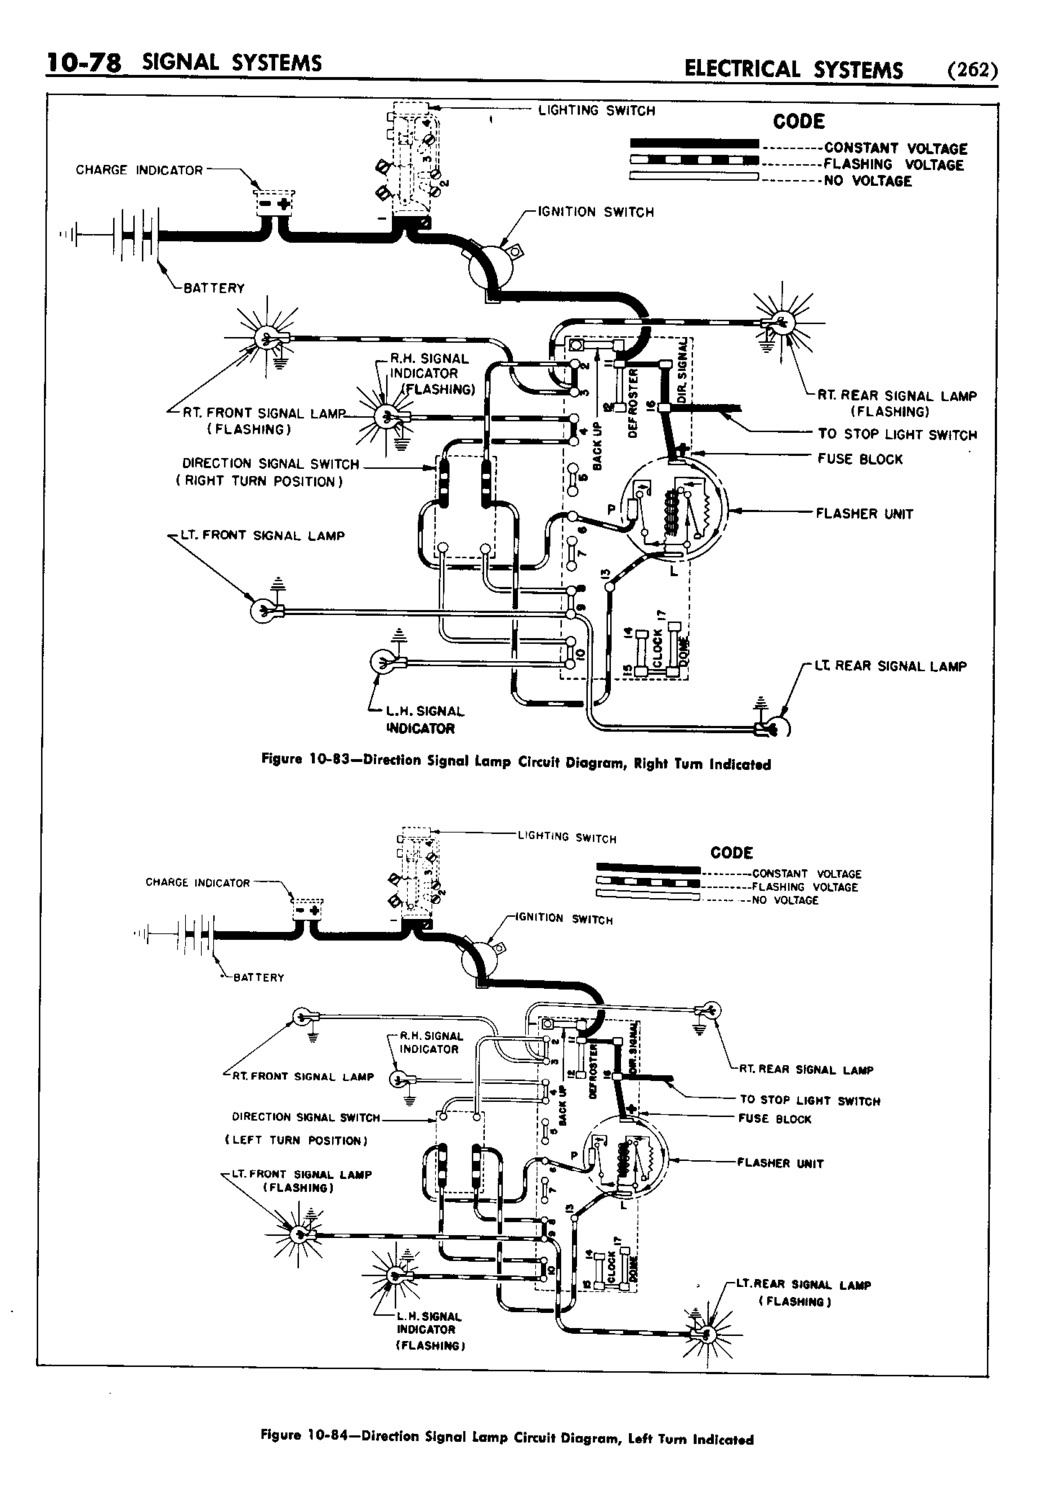 n_11 1953 Buick Shop Manual - Electrical Systems-079-079.jpg